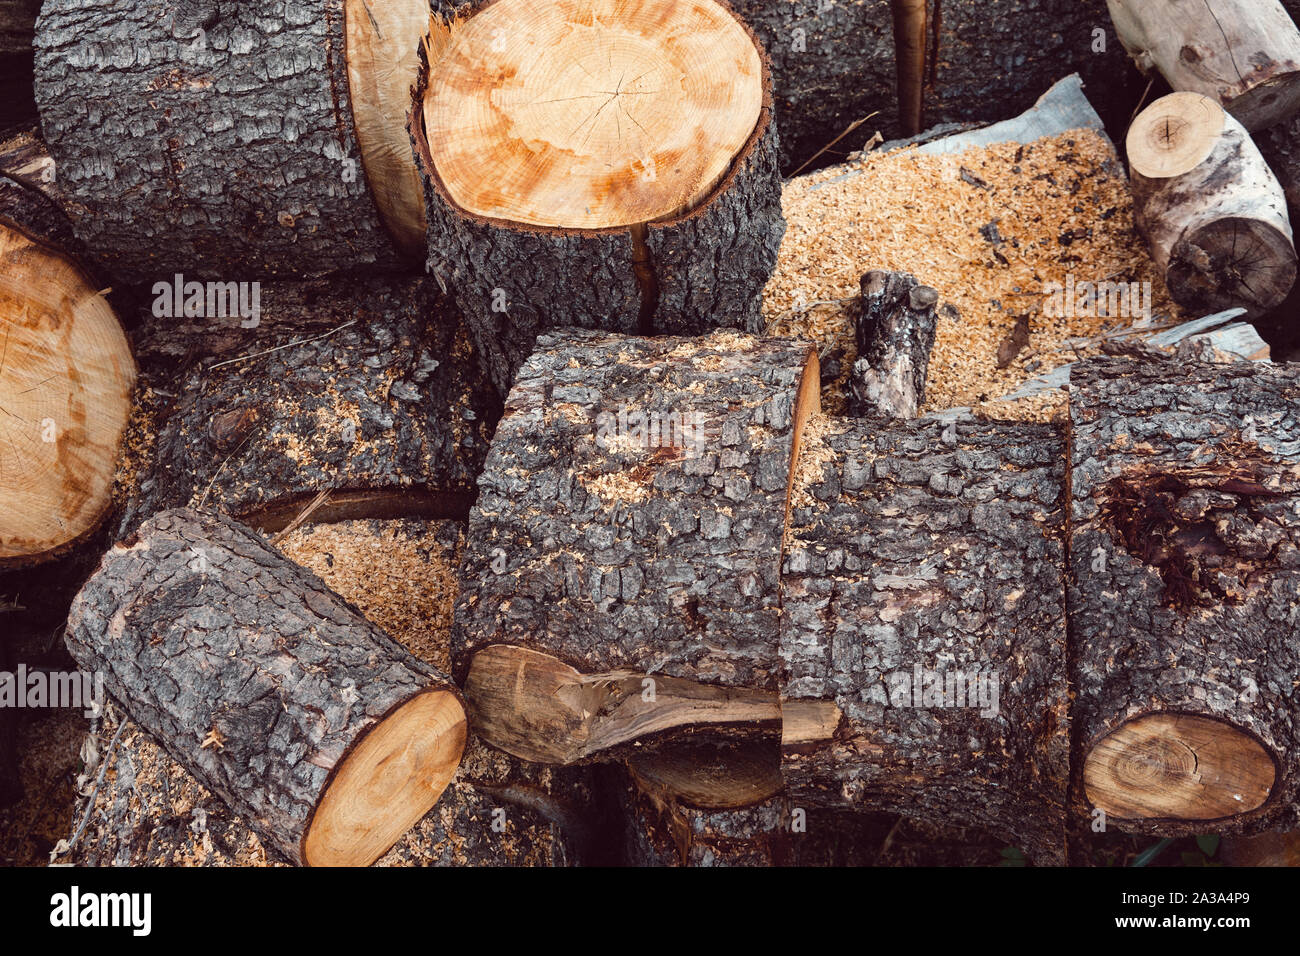 Pile of Logs In The Countryside Stock Photo